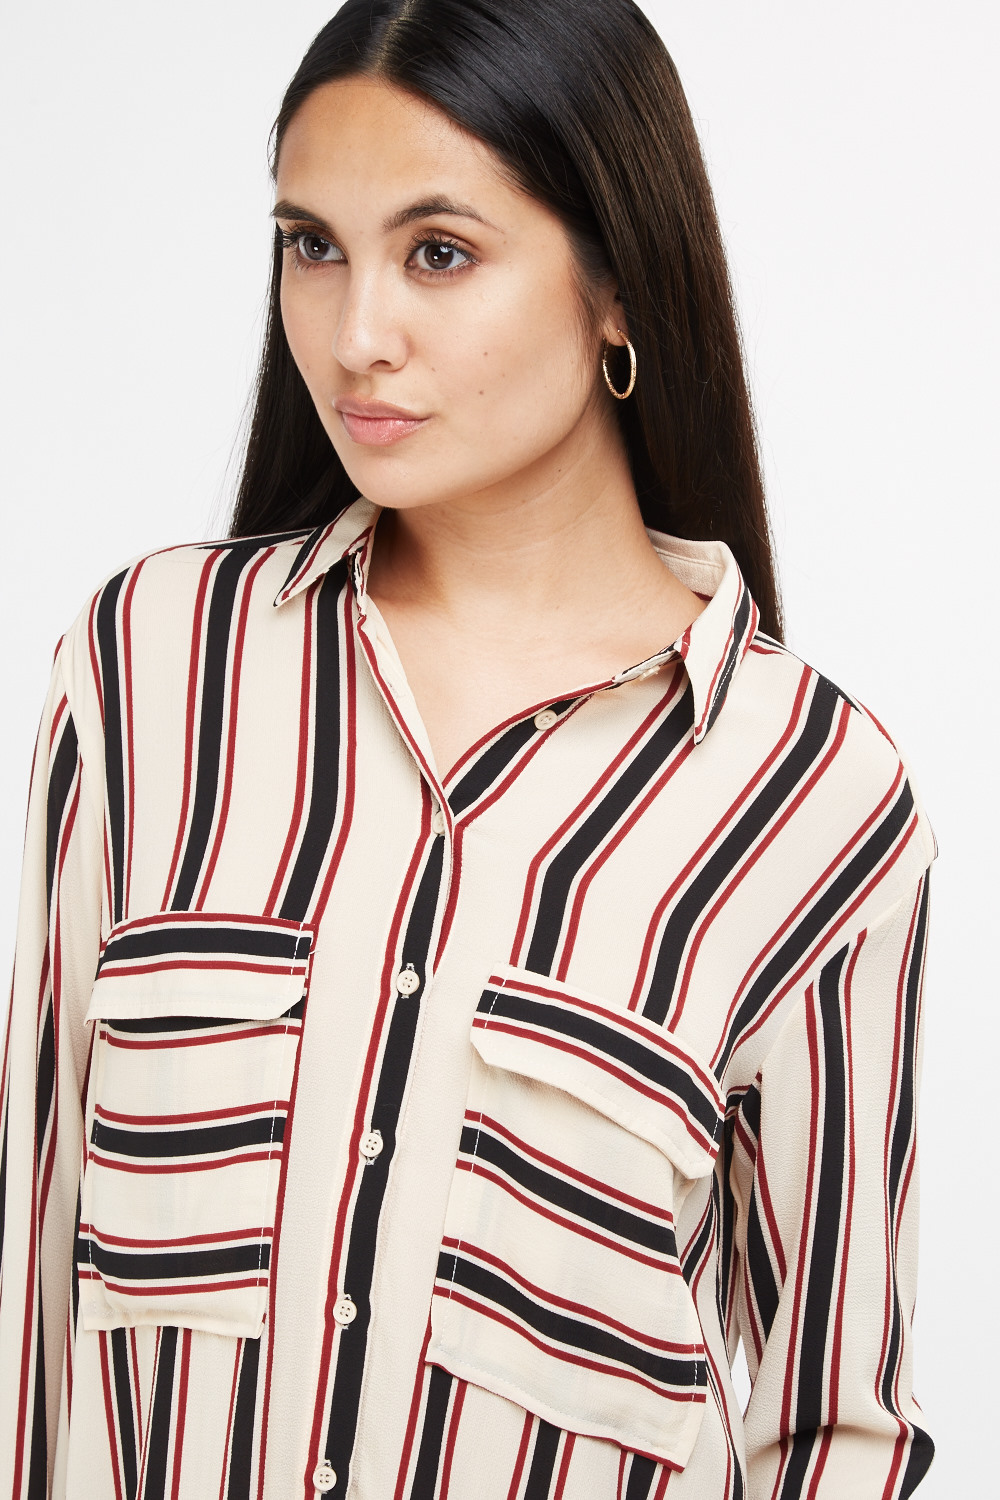 Flap Pockets Front Striped Shirt - Just $3